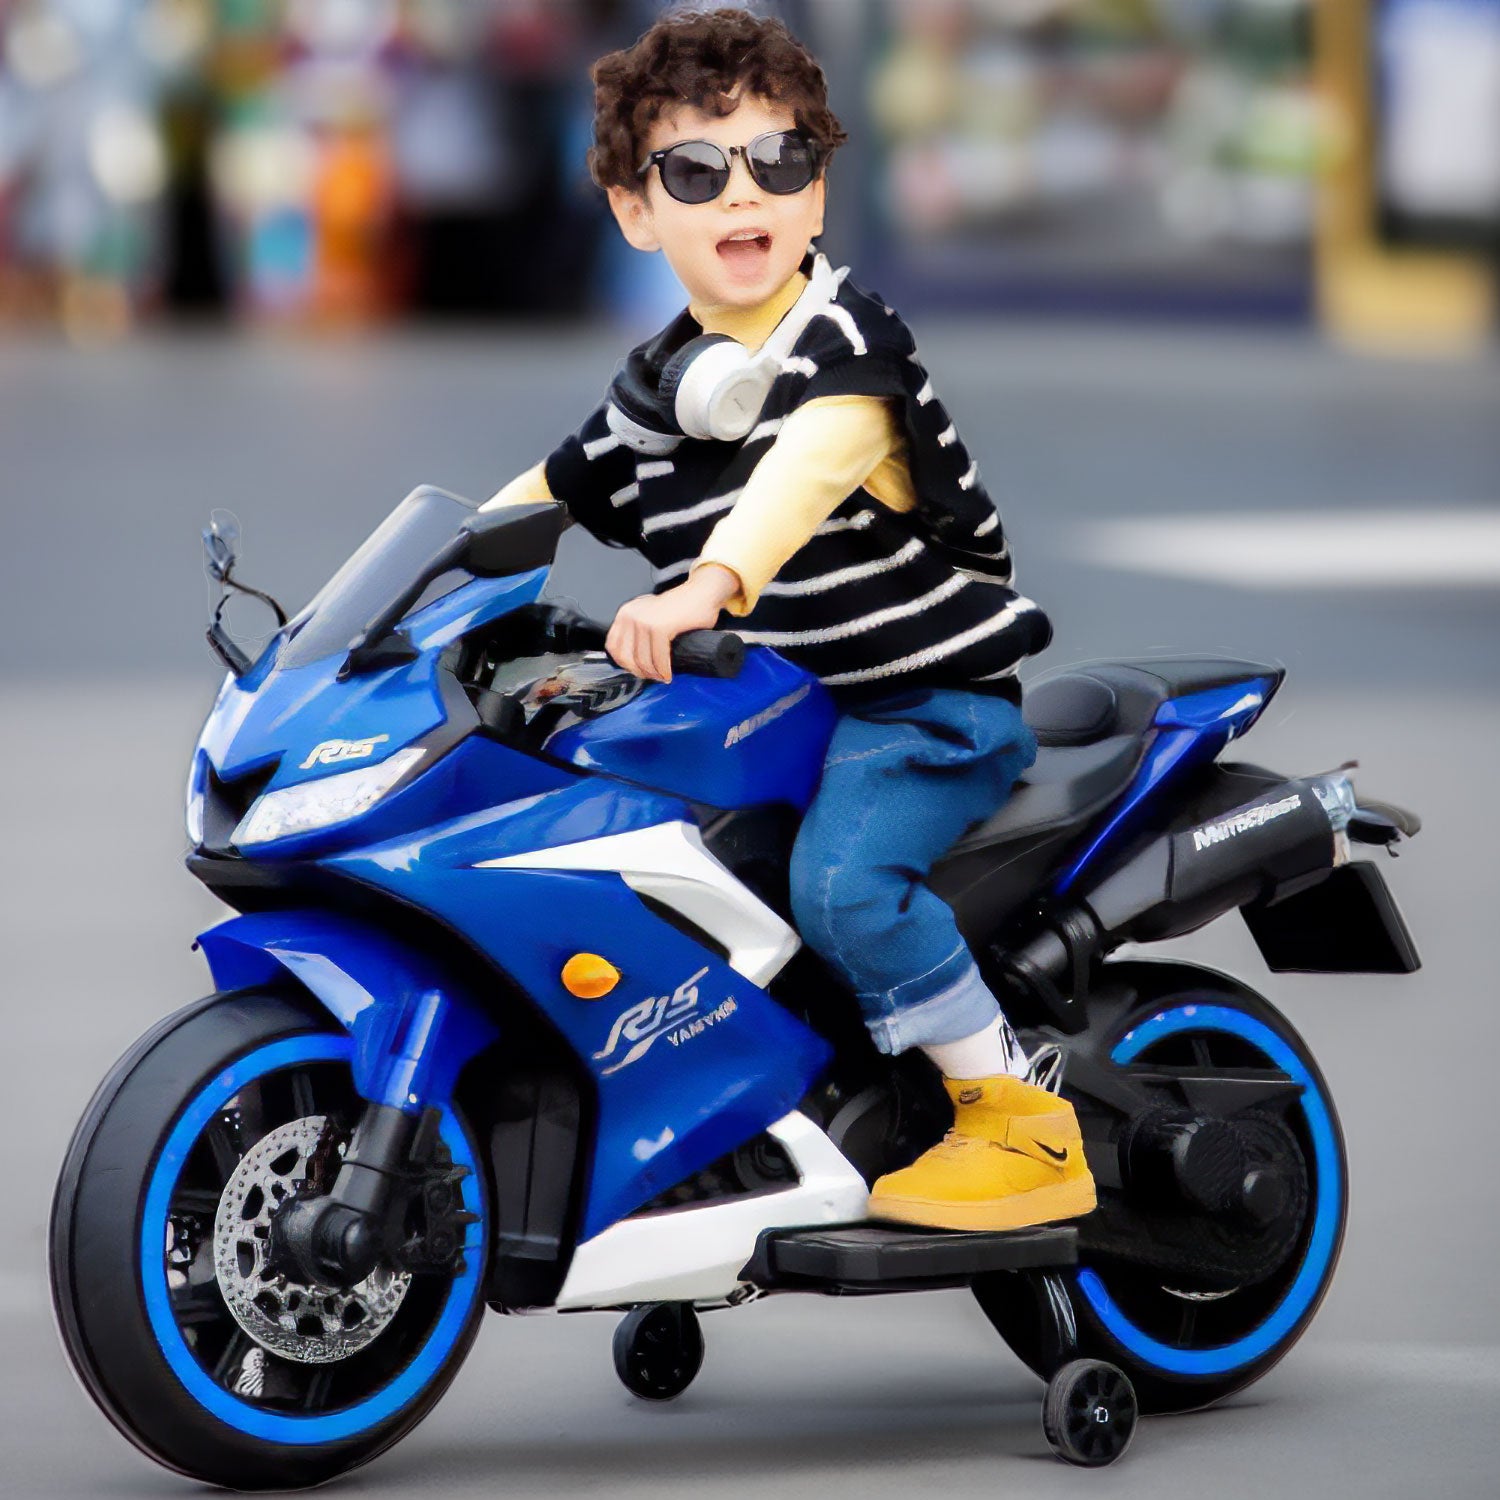 Baby Moo R15 Rechargeable 12V Battery Operated Ride On Bike for Kids with LED Lights, Music, and USB Port - Blue